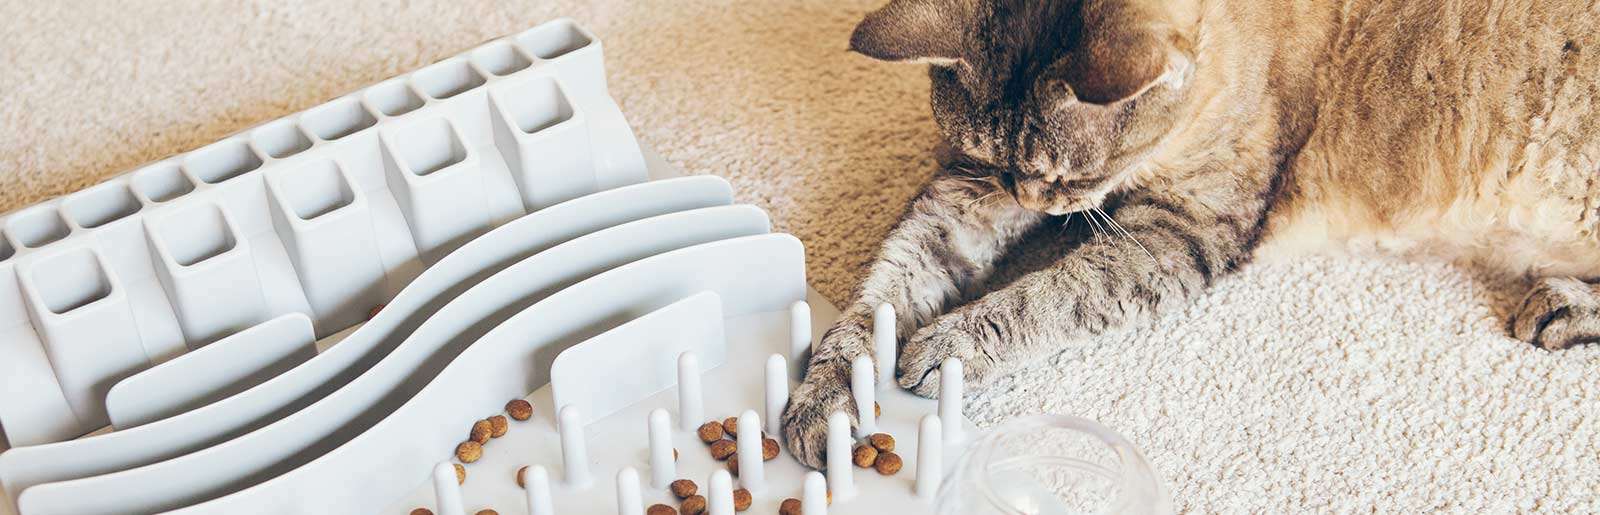 Activity Feeding for cats: Keeping cats busy with cat food